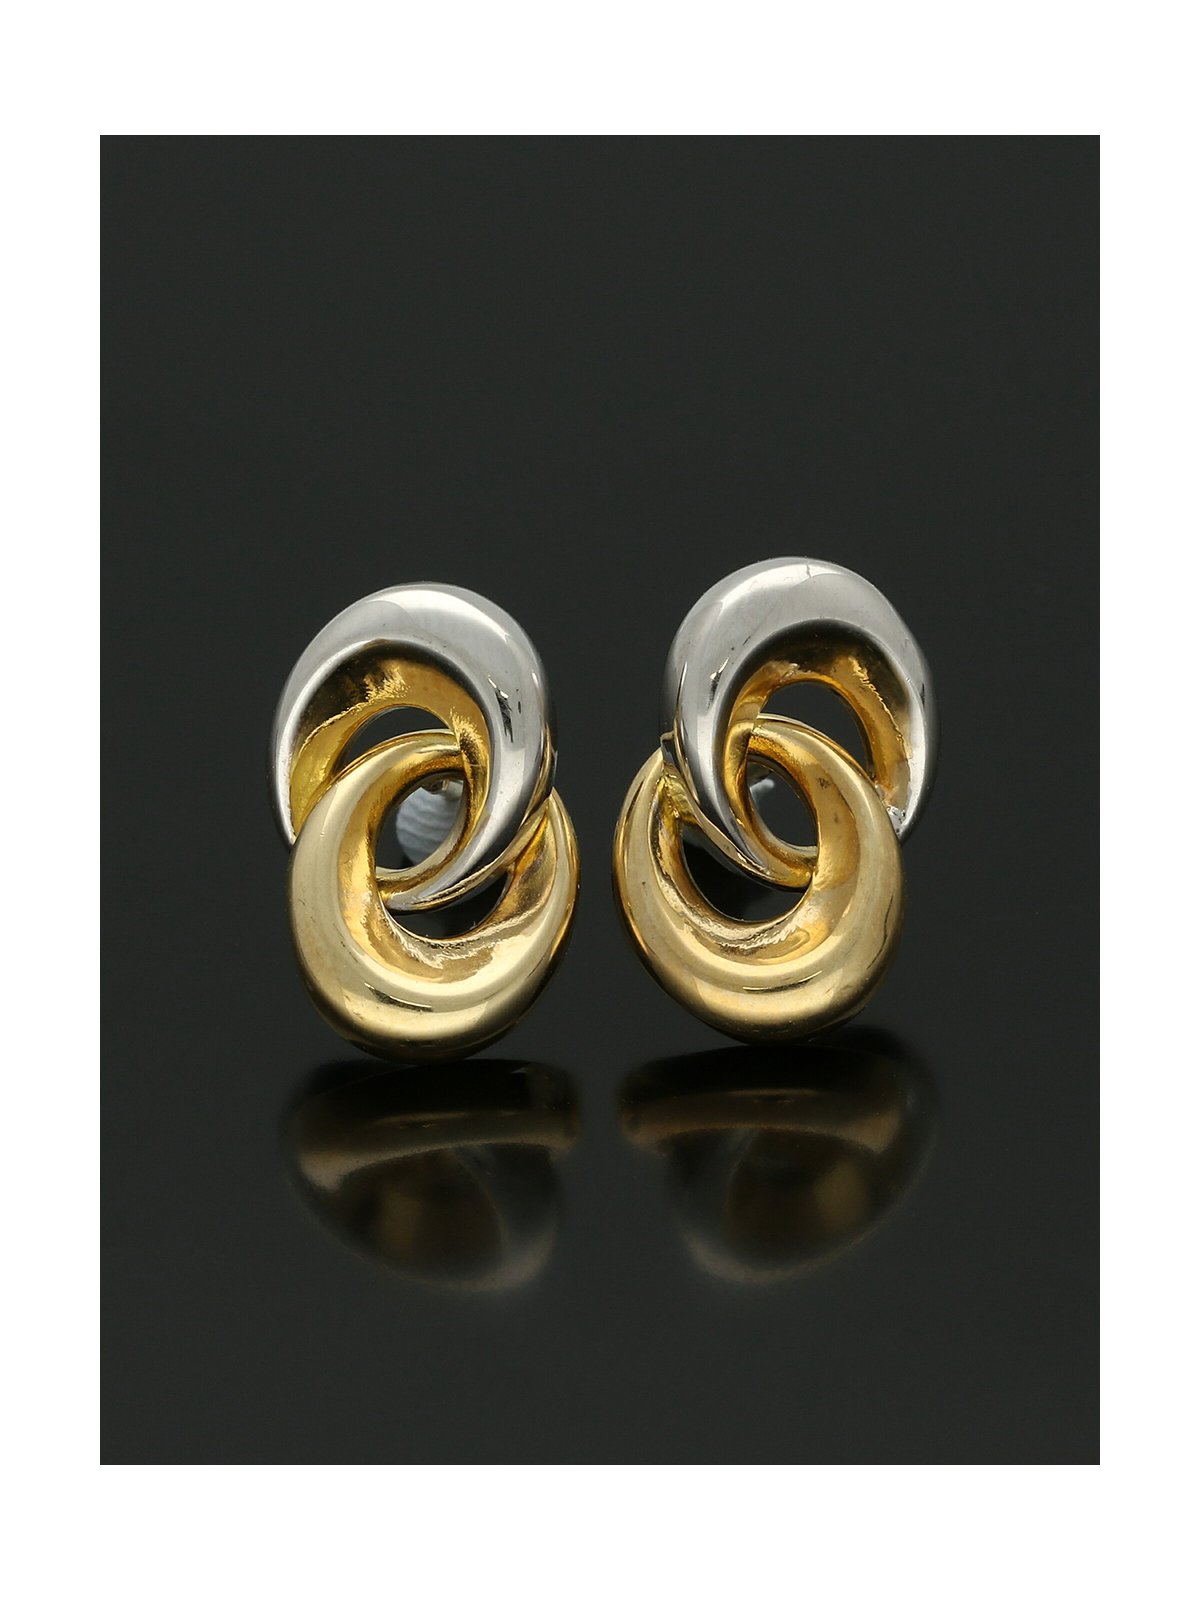 Linked Oval Stud Earrings 13x9mm in 9ct Yellow & White Gold